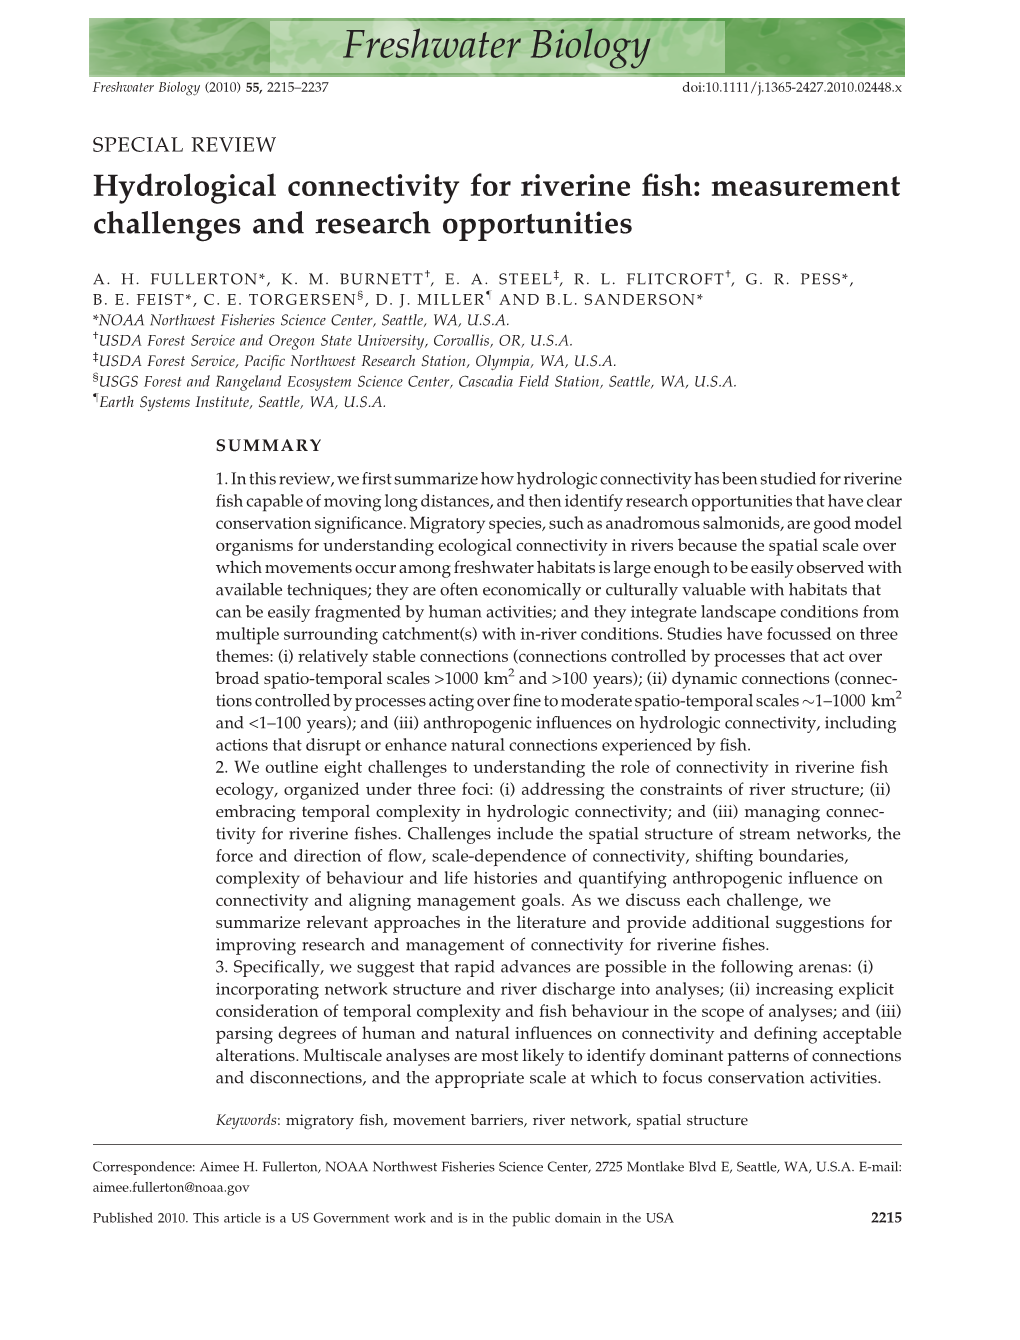 Hydrological Connectivity for Riverine Fish: Measurement Challenges and Research Opportunities